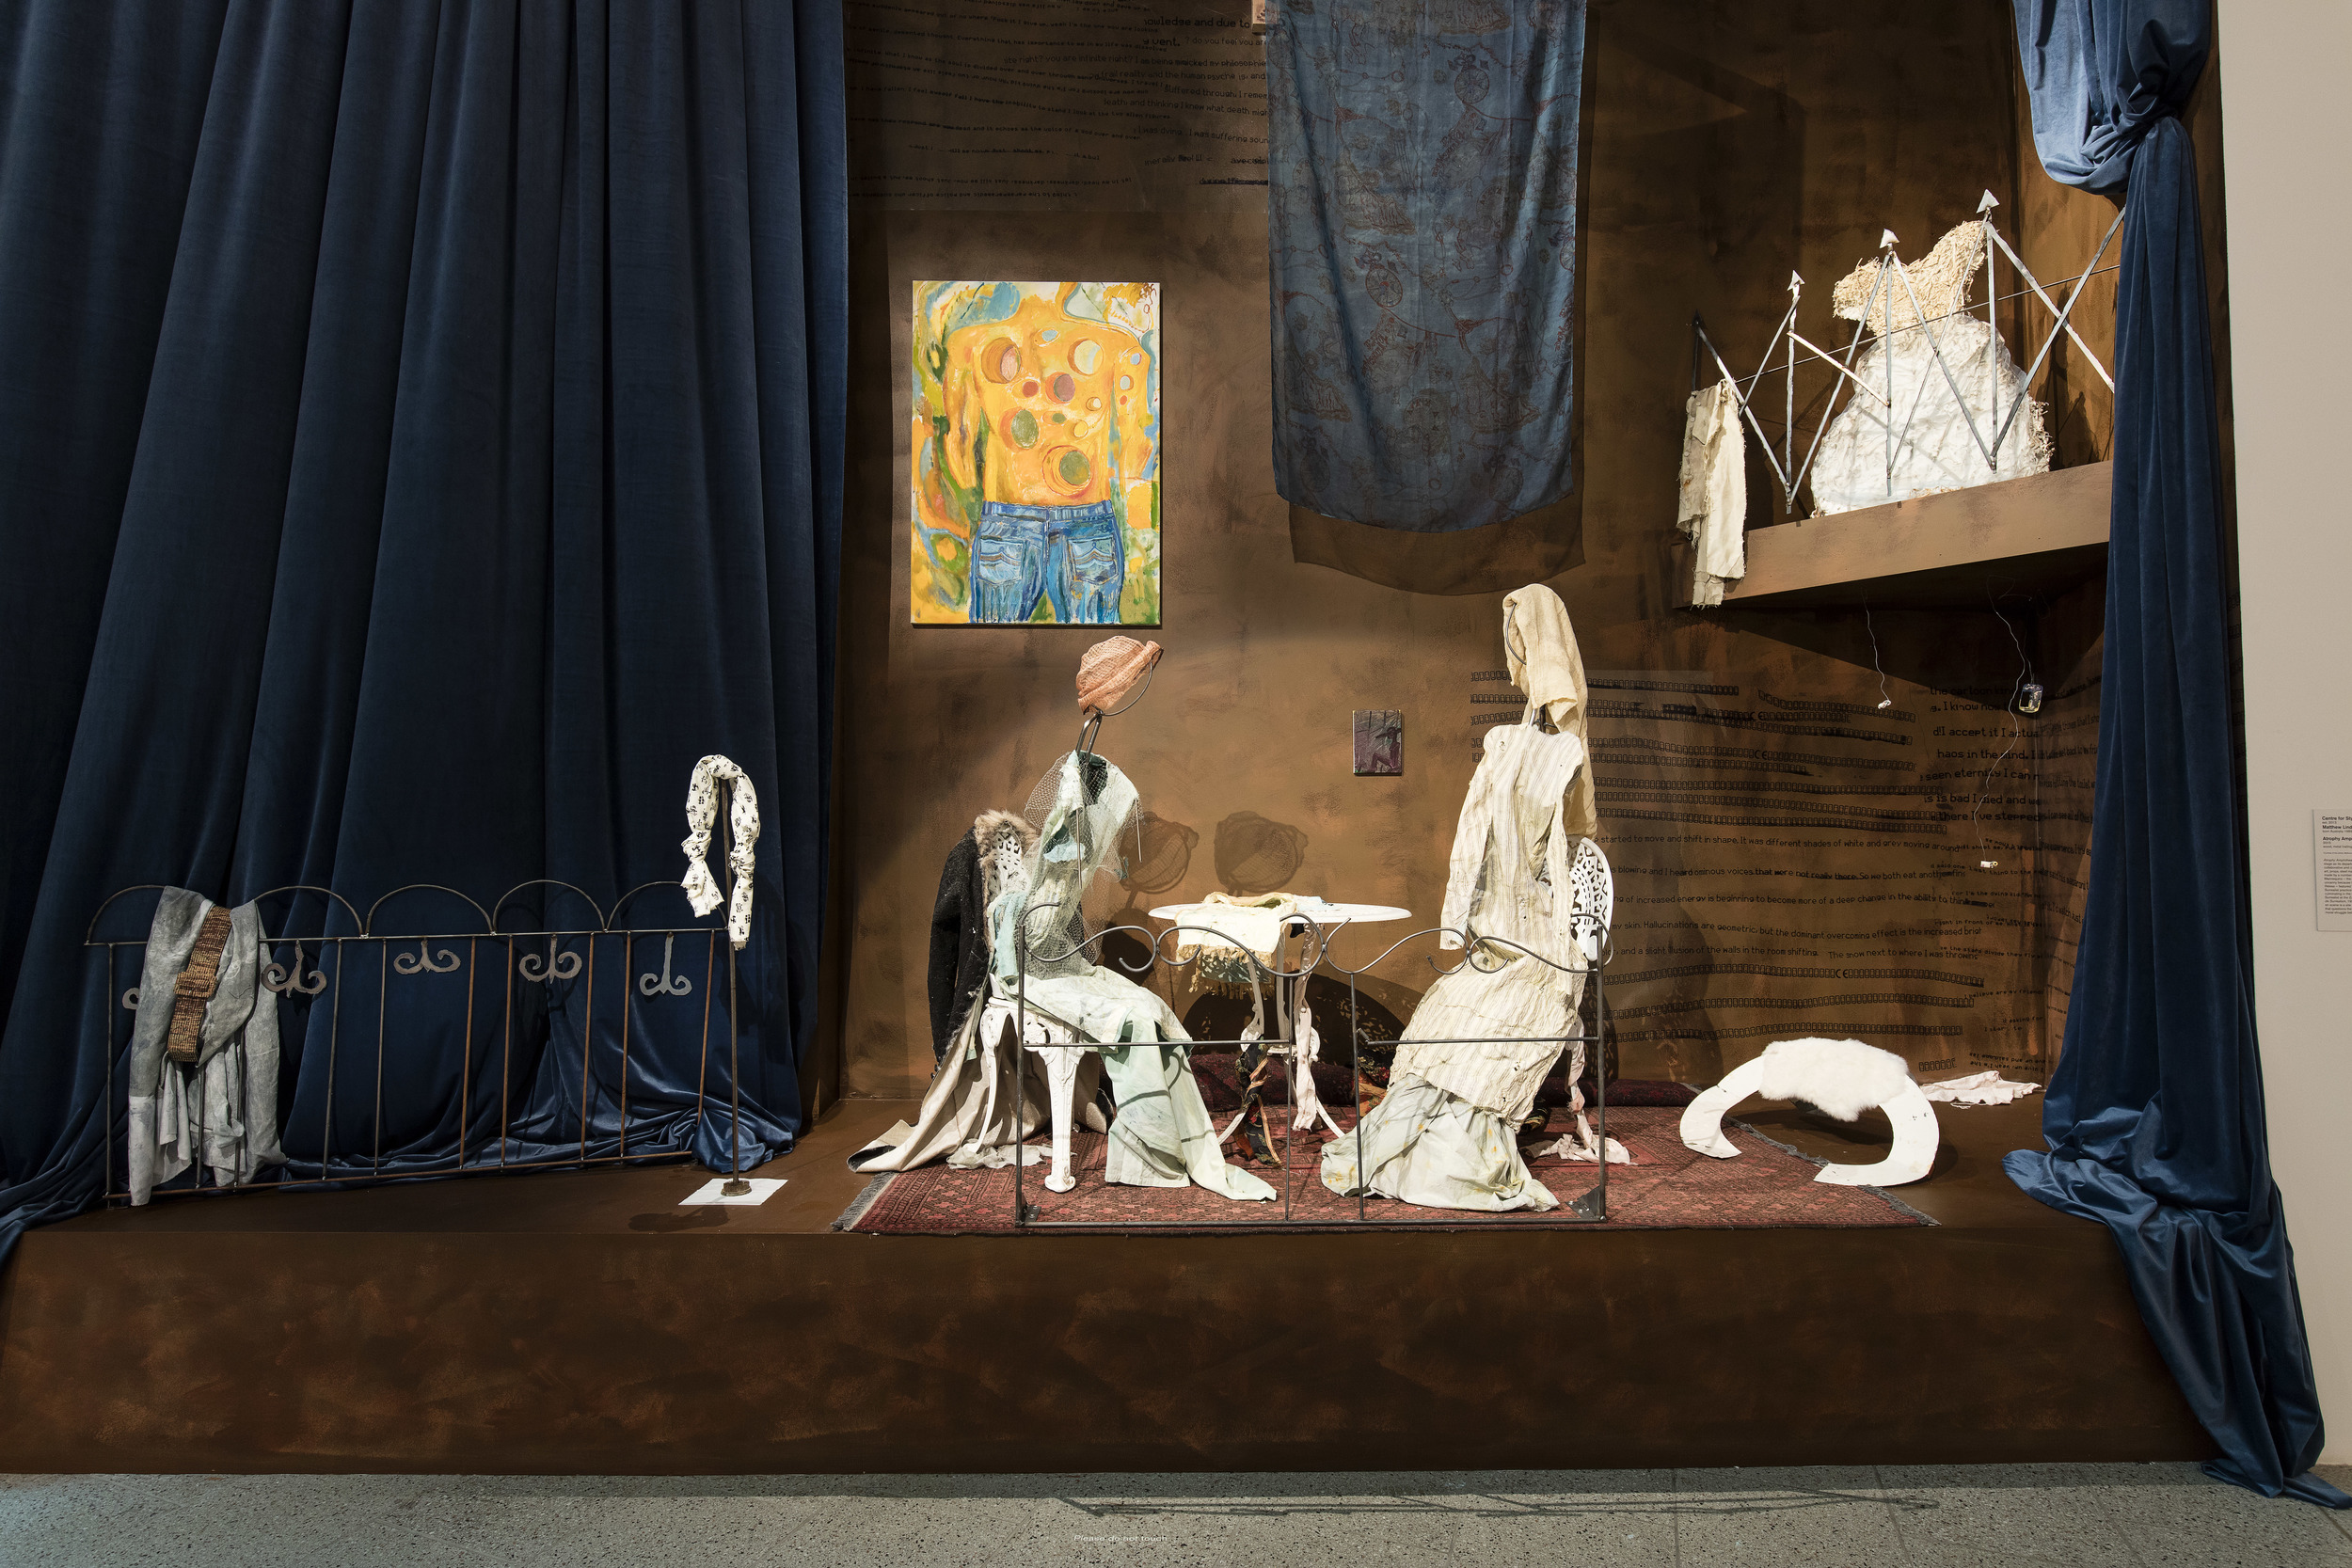  Atrophy Ampitheatre, 2015 curated by  Centre for Style   as part of Lurid Beauty at the National Gallery of Victoria   